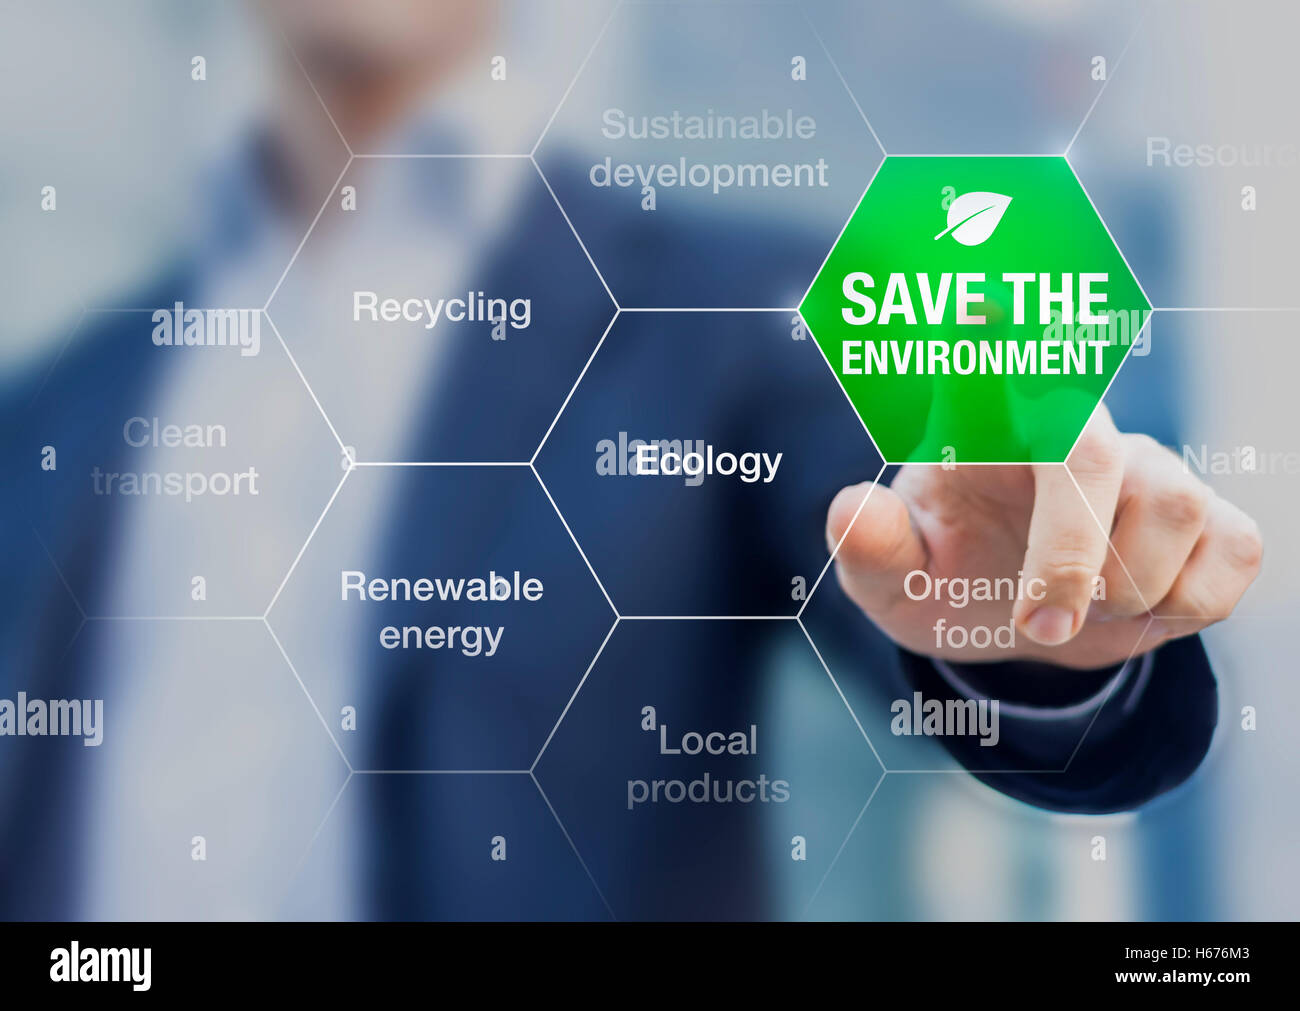 Save the environment icon touched by a businessman, climate change conference Stock Photo